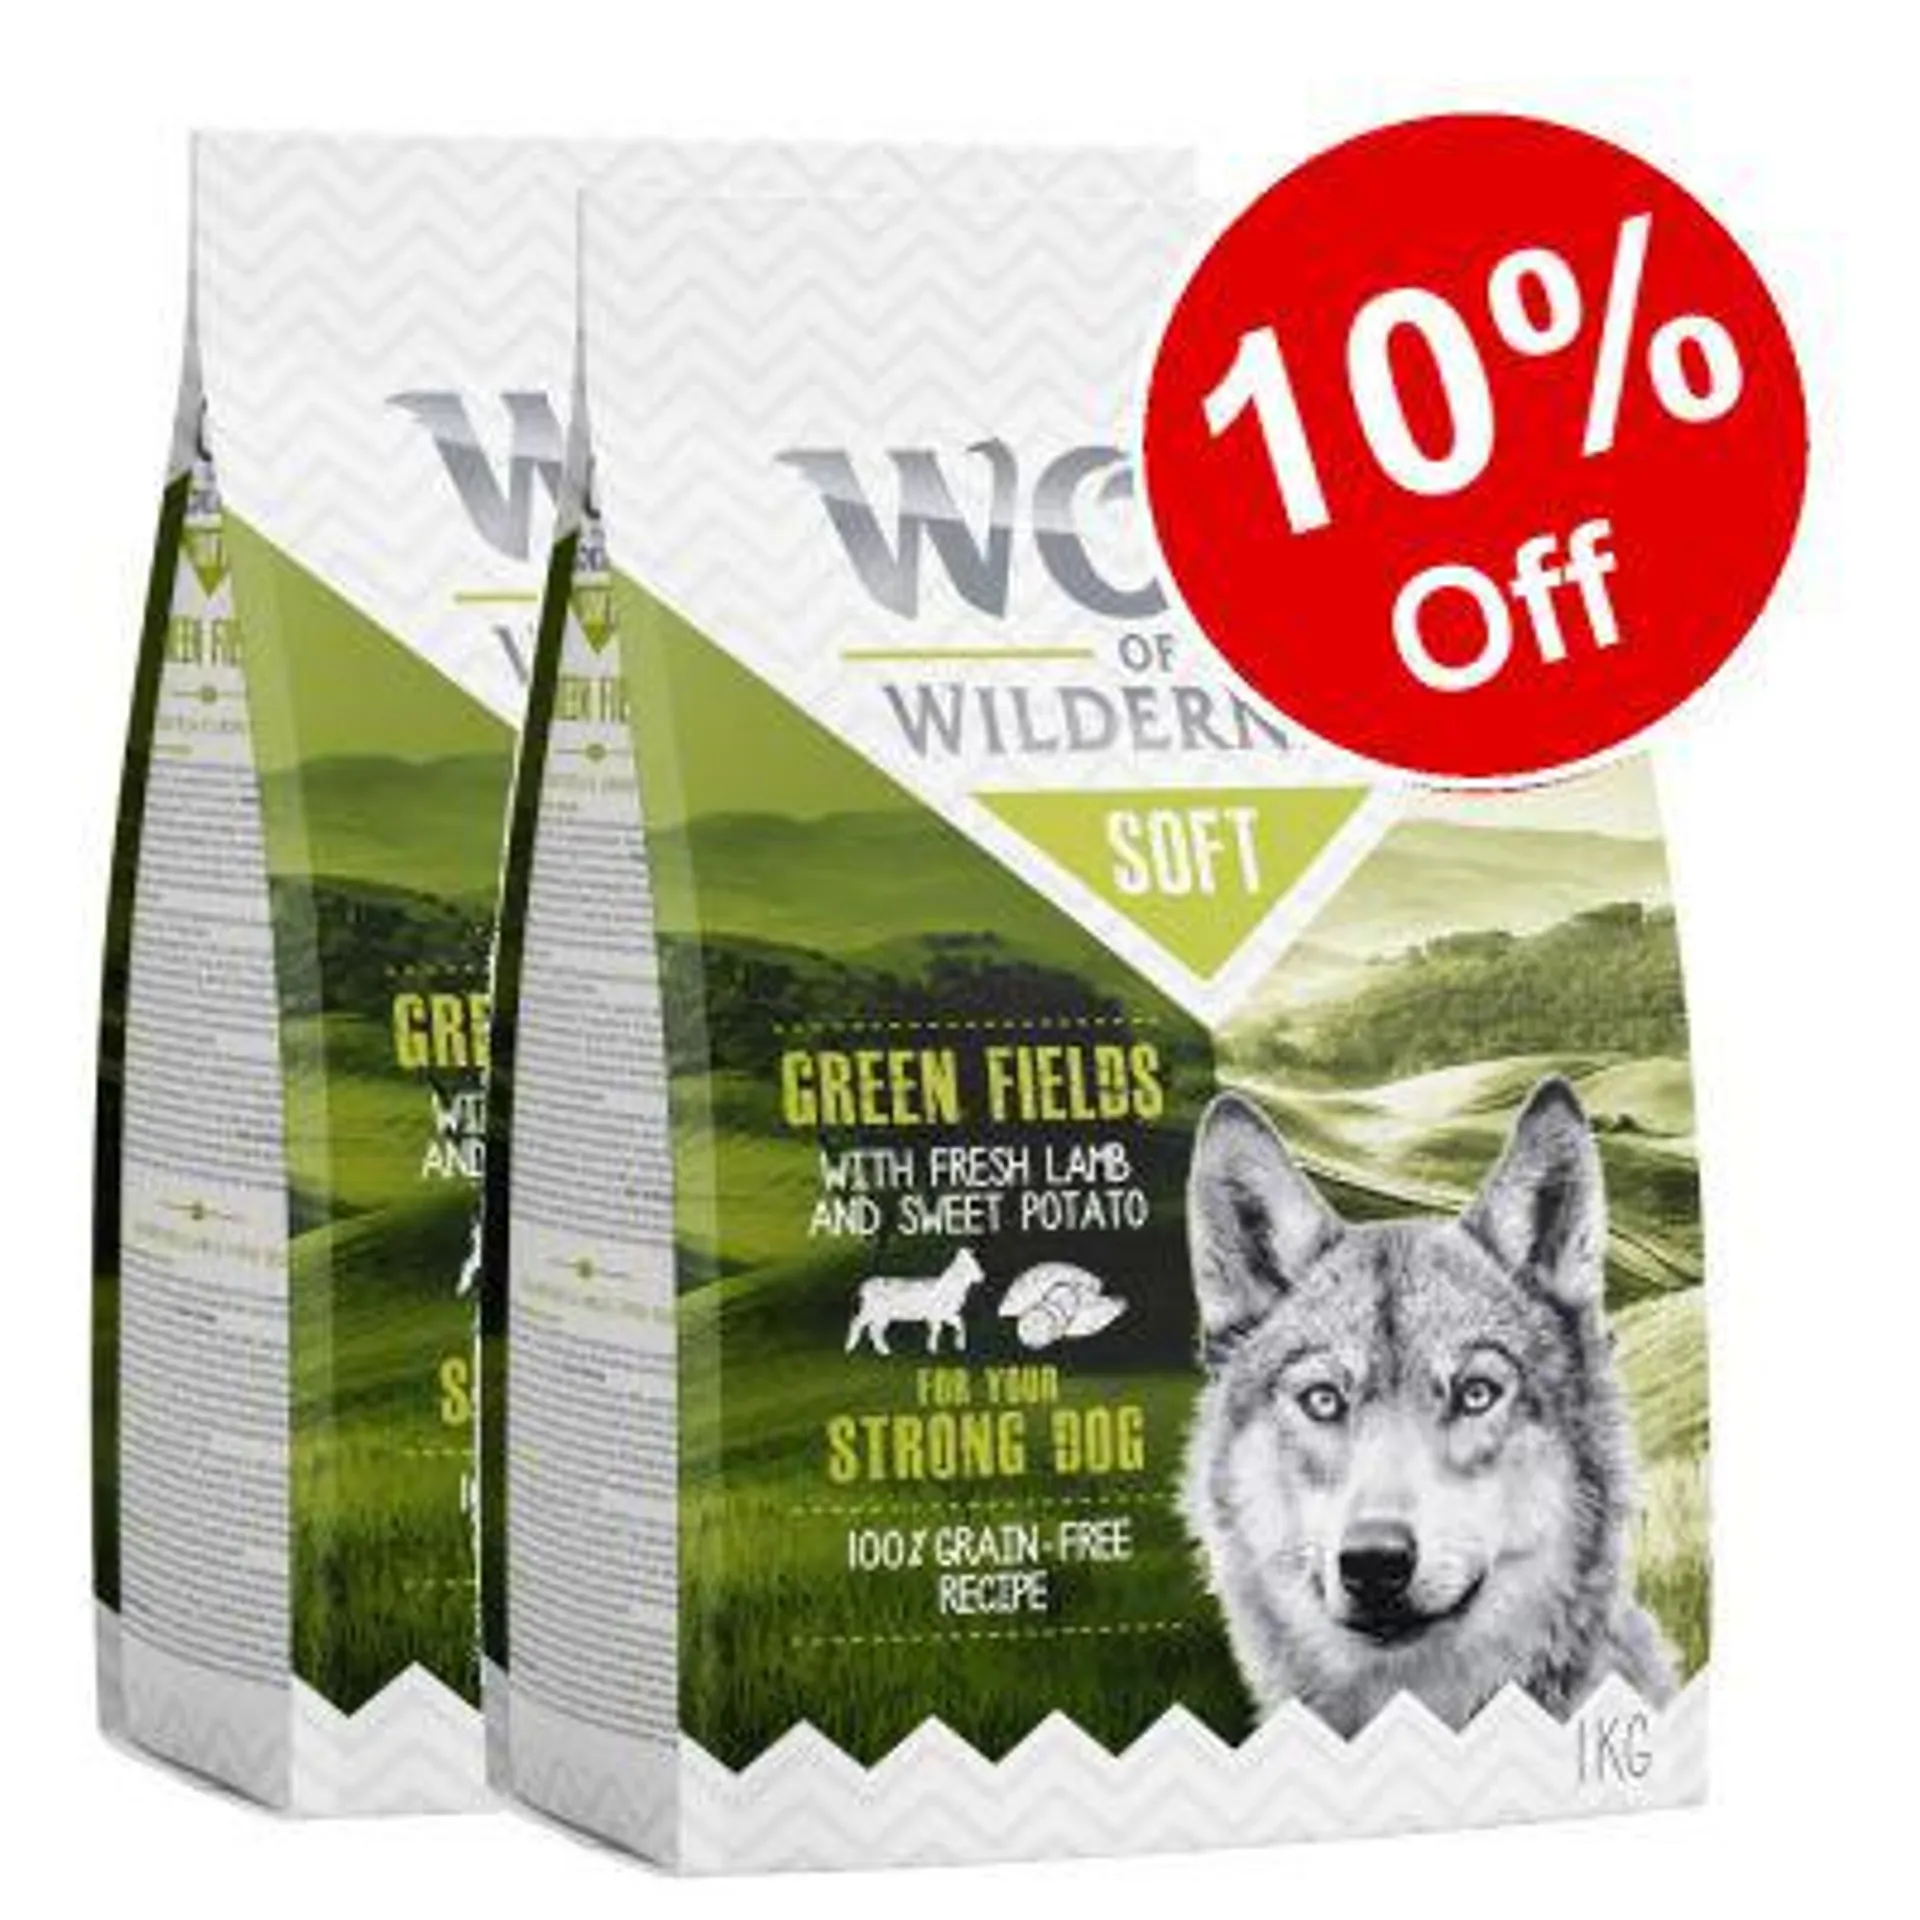 2 x 1kg Wolf of Wilderness Dry Dog Food - 10% Off!*